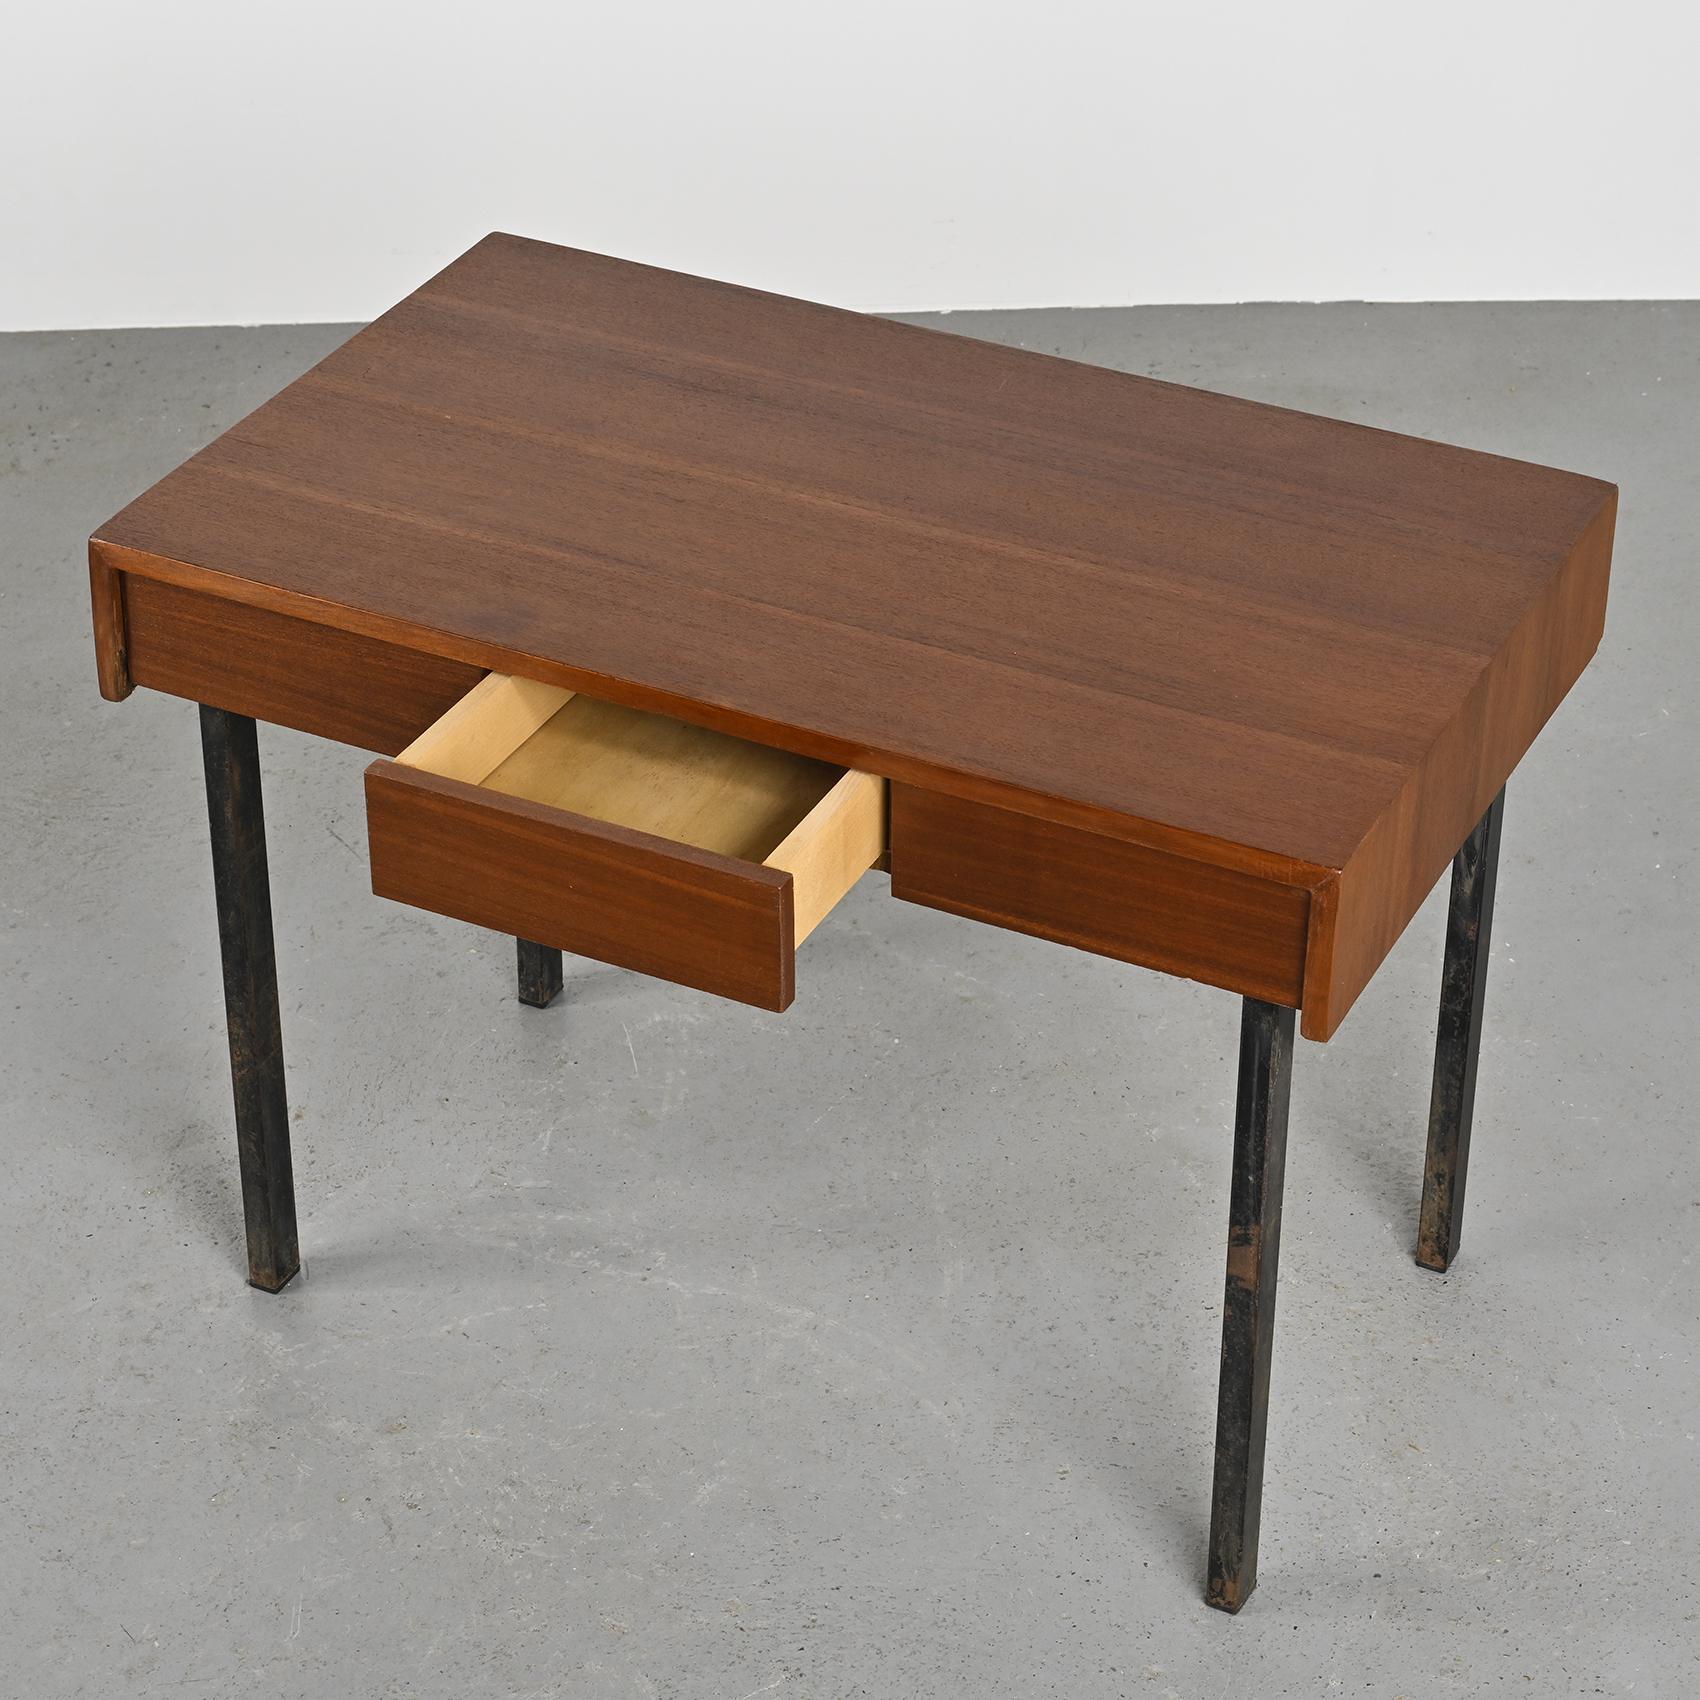 Mid-20th Century Cansado Desk by Charlotte Perriand, France circa 1960